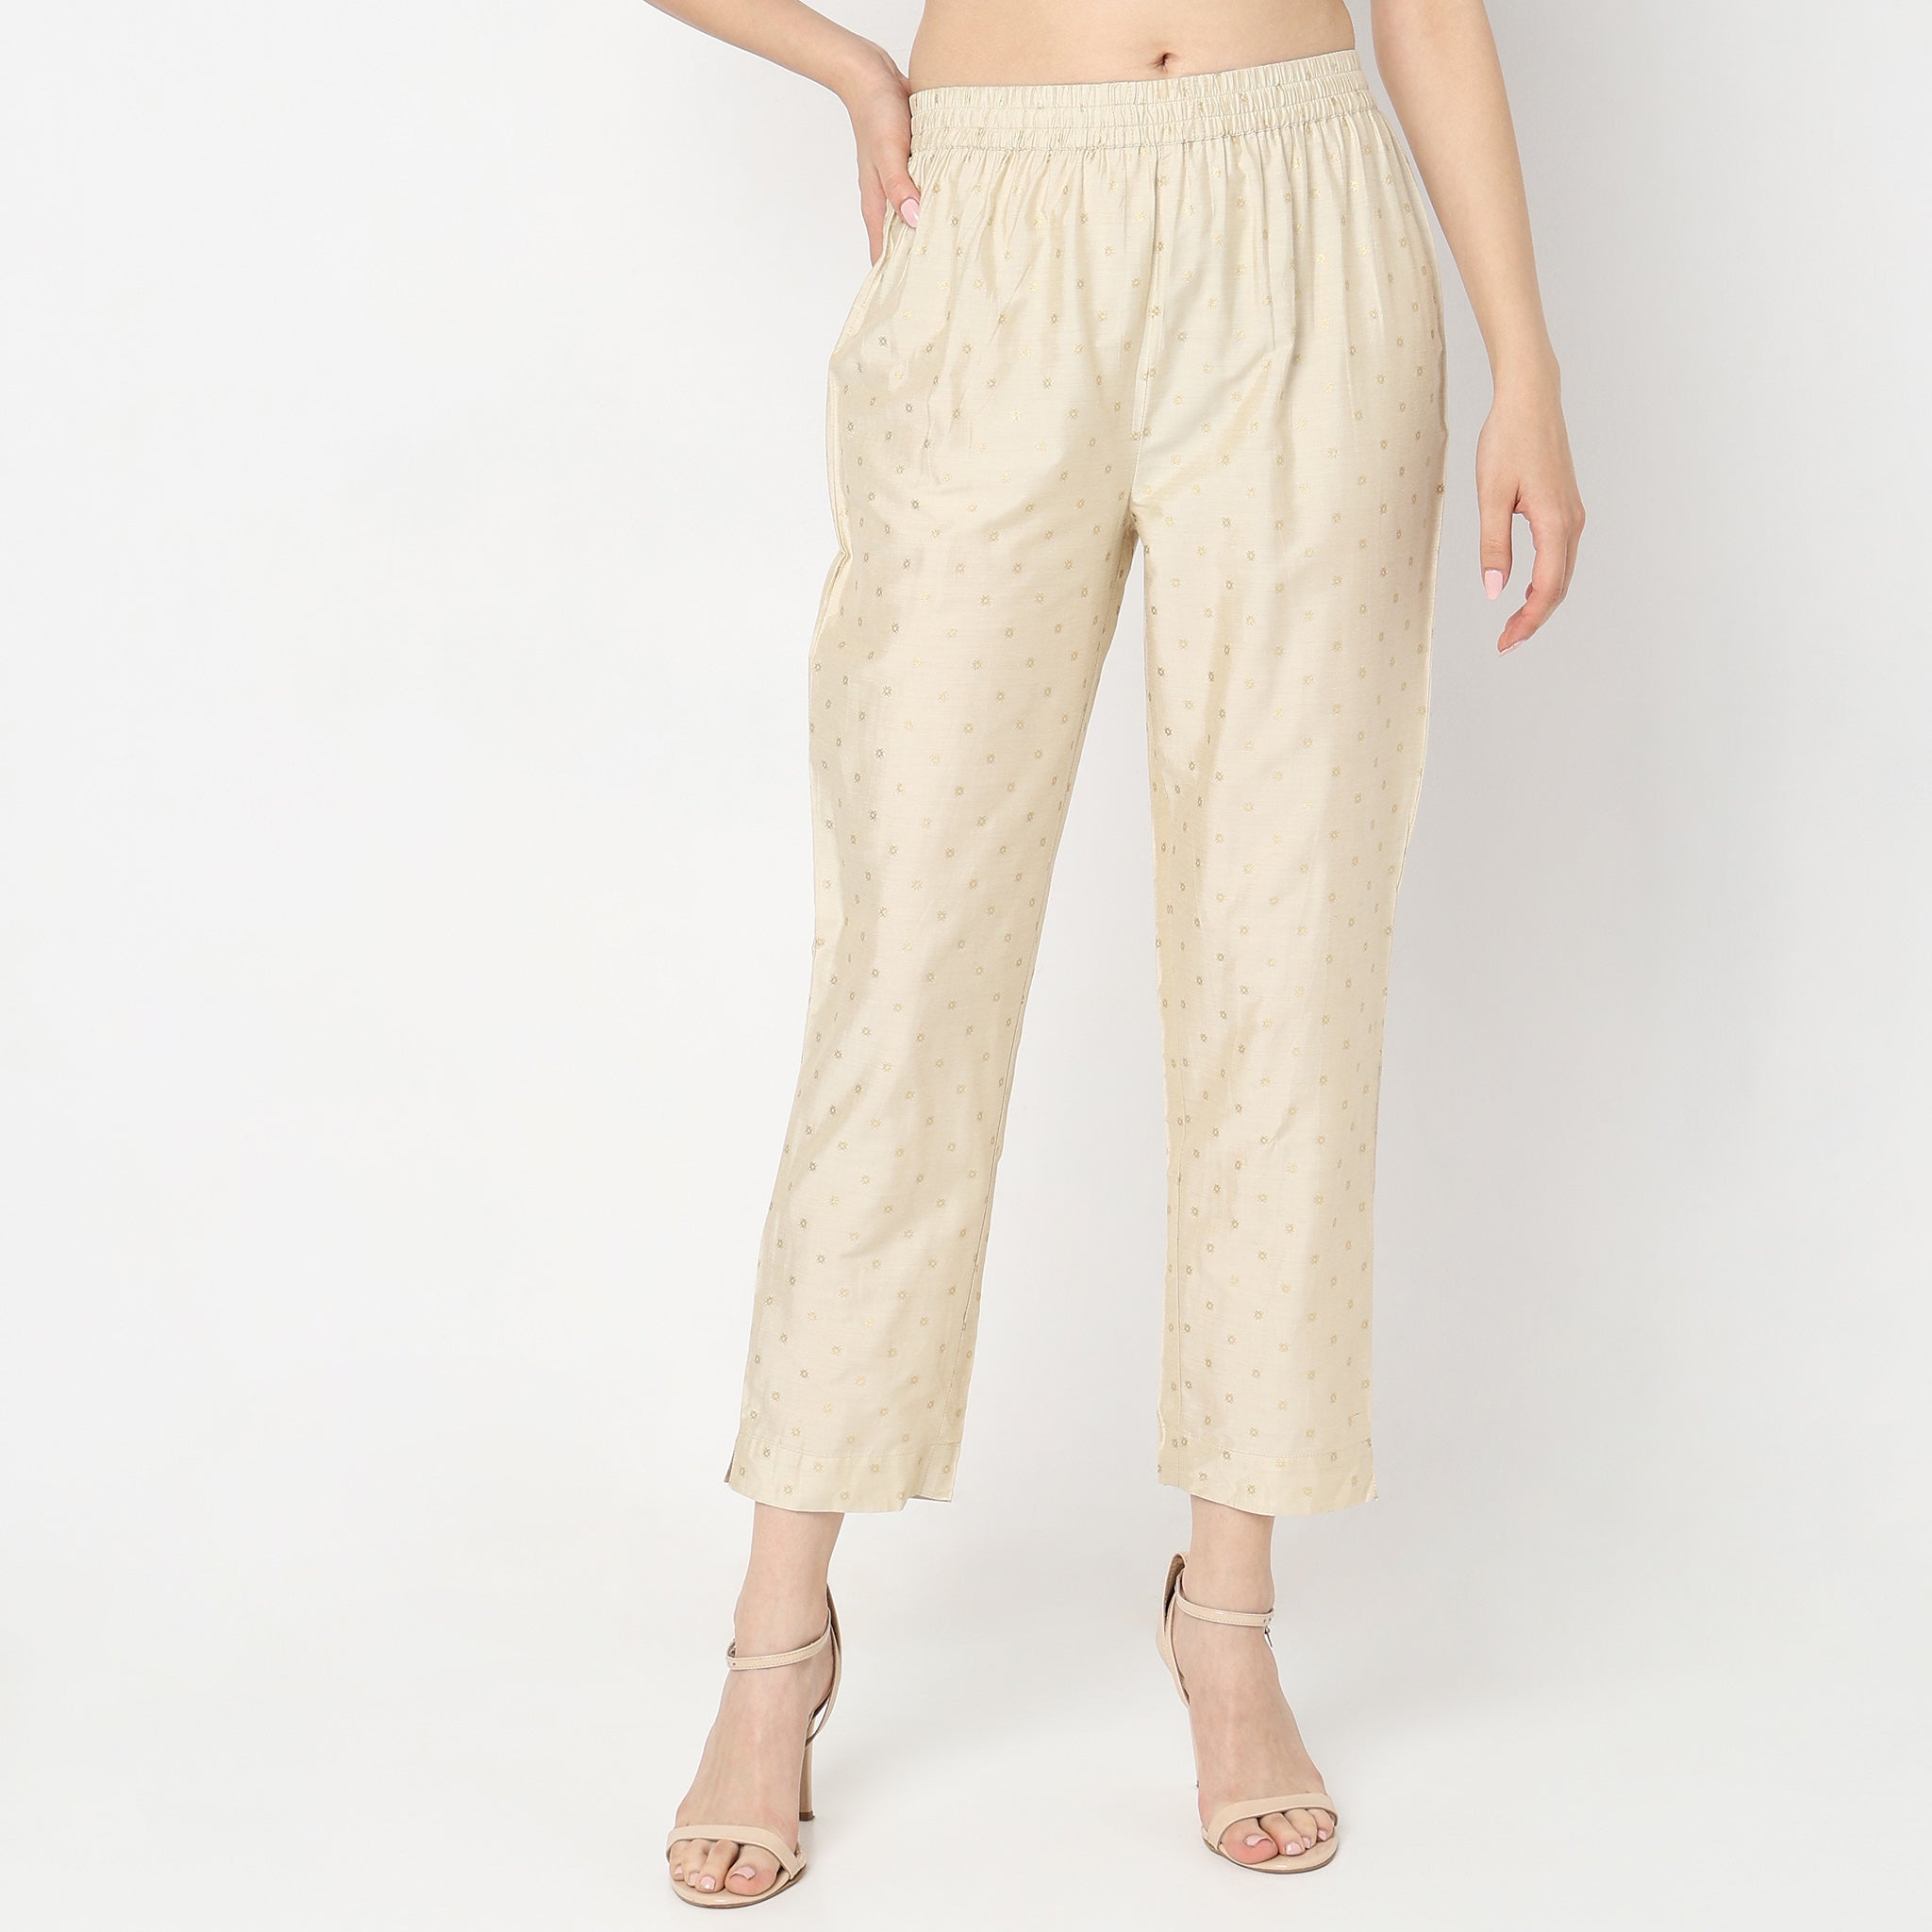 Straight Fit Printed Mid Rise Ethnic Pants